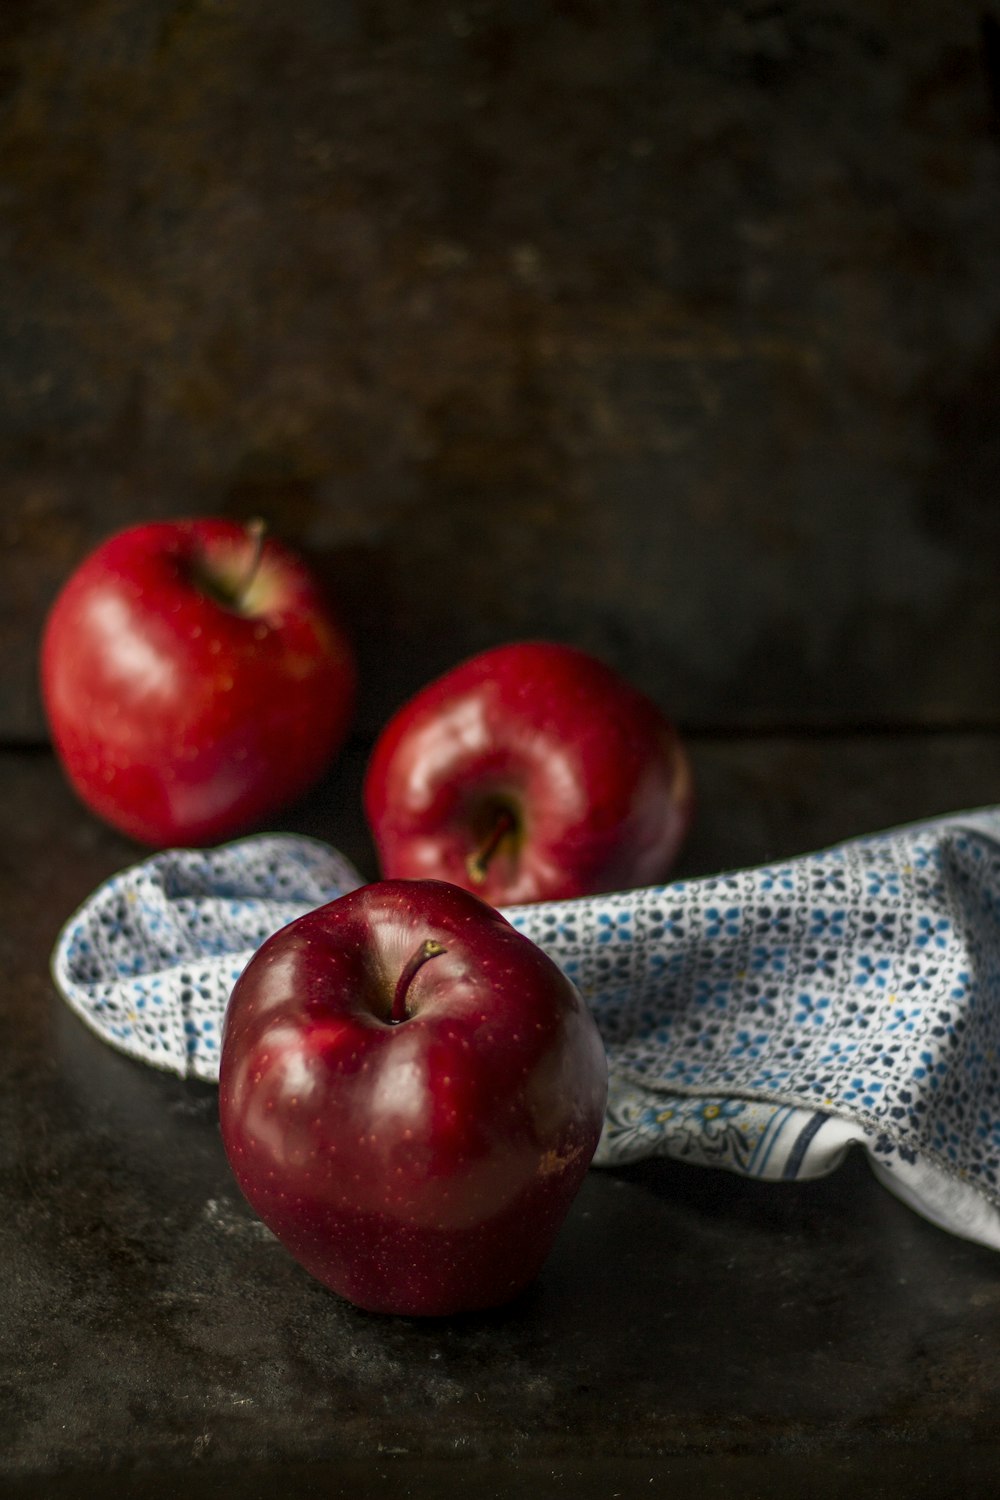 three red apples on brown surface